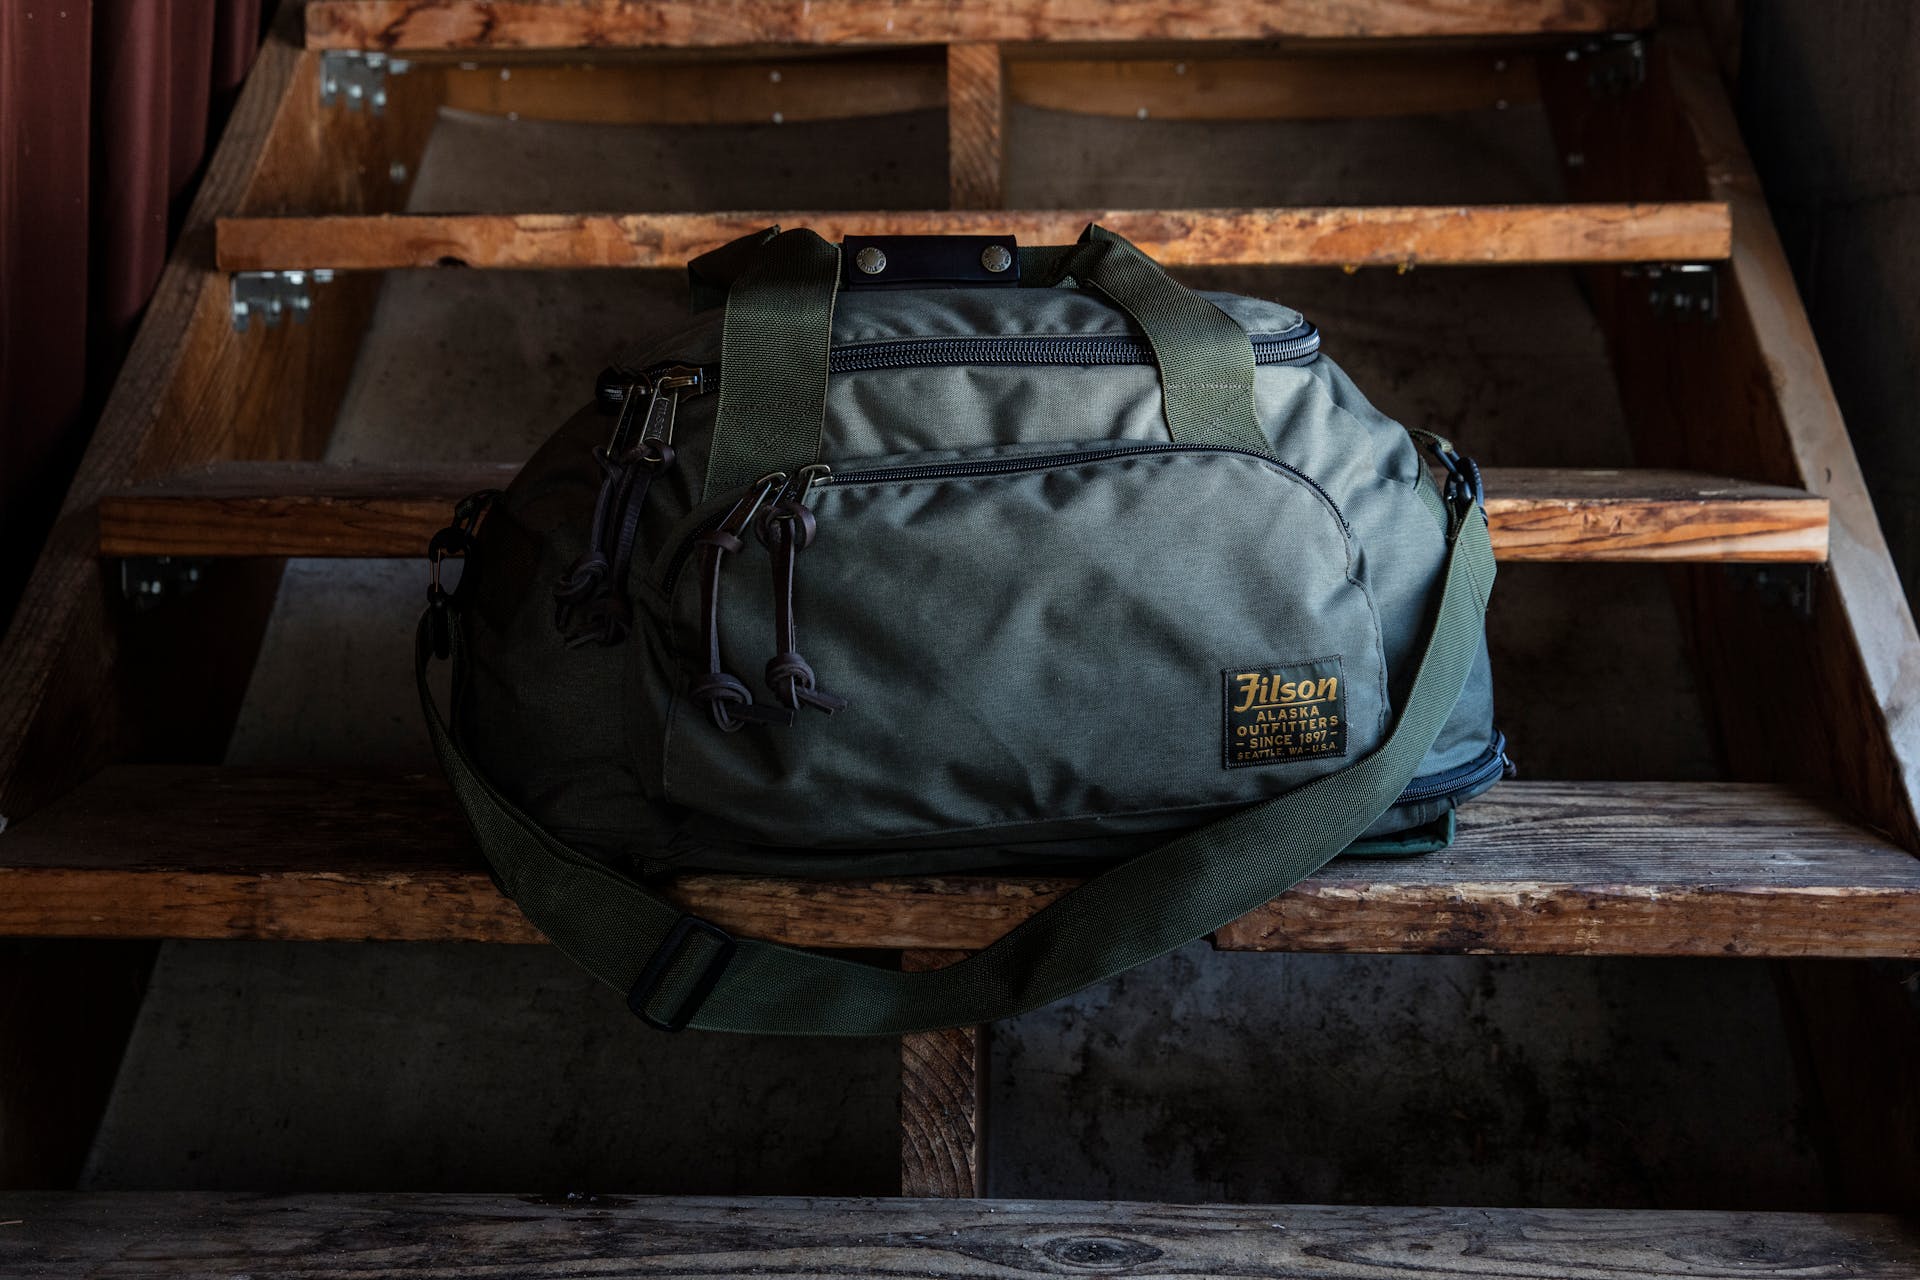 Filson Duffle Pack in otter green resting on wooden staircase